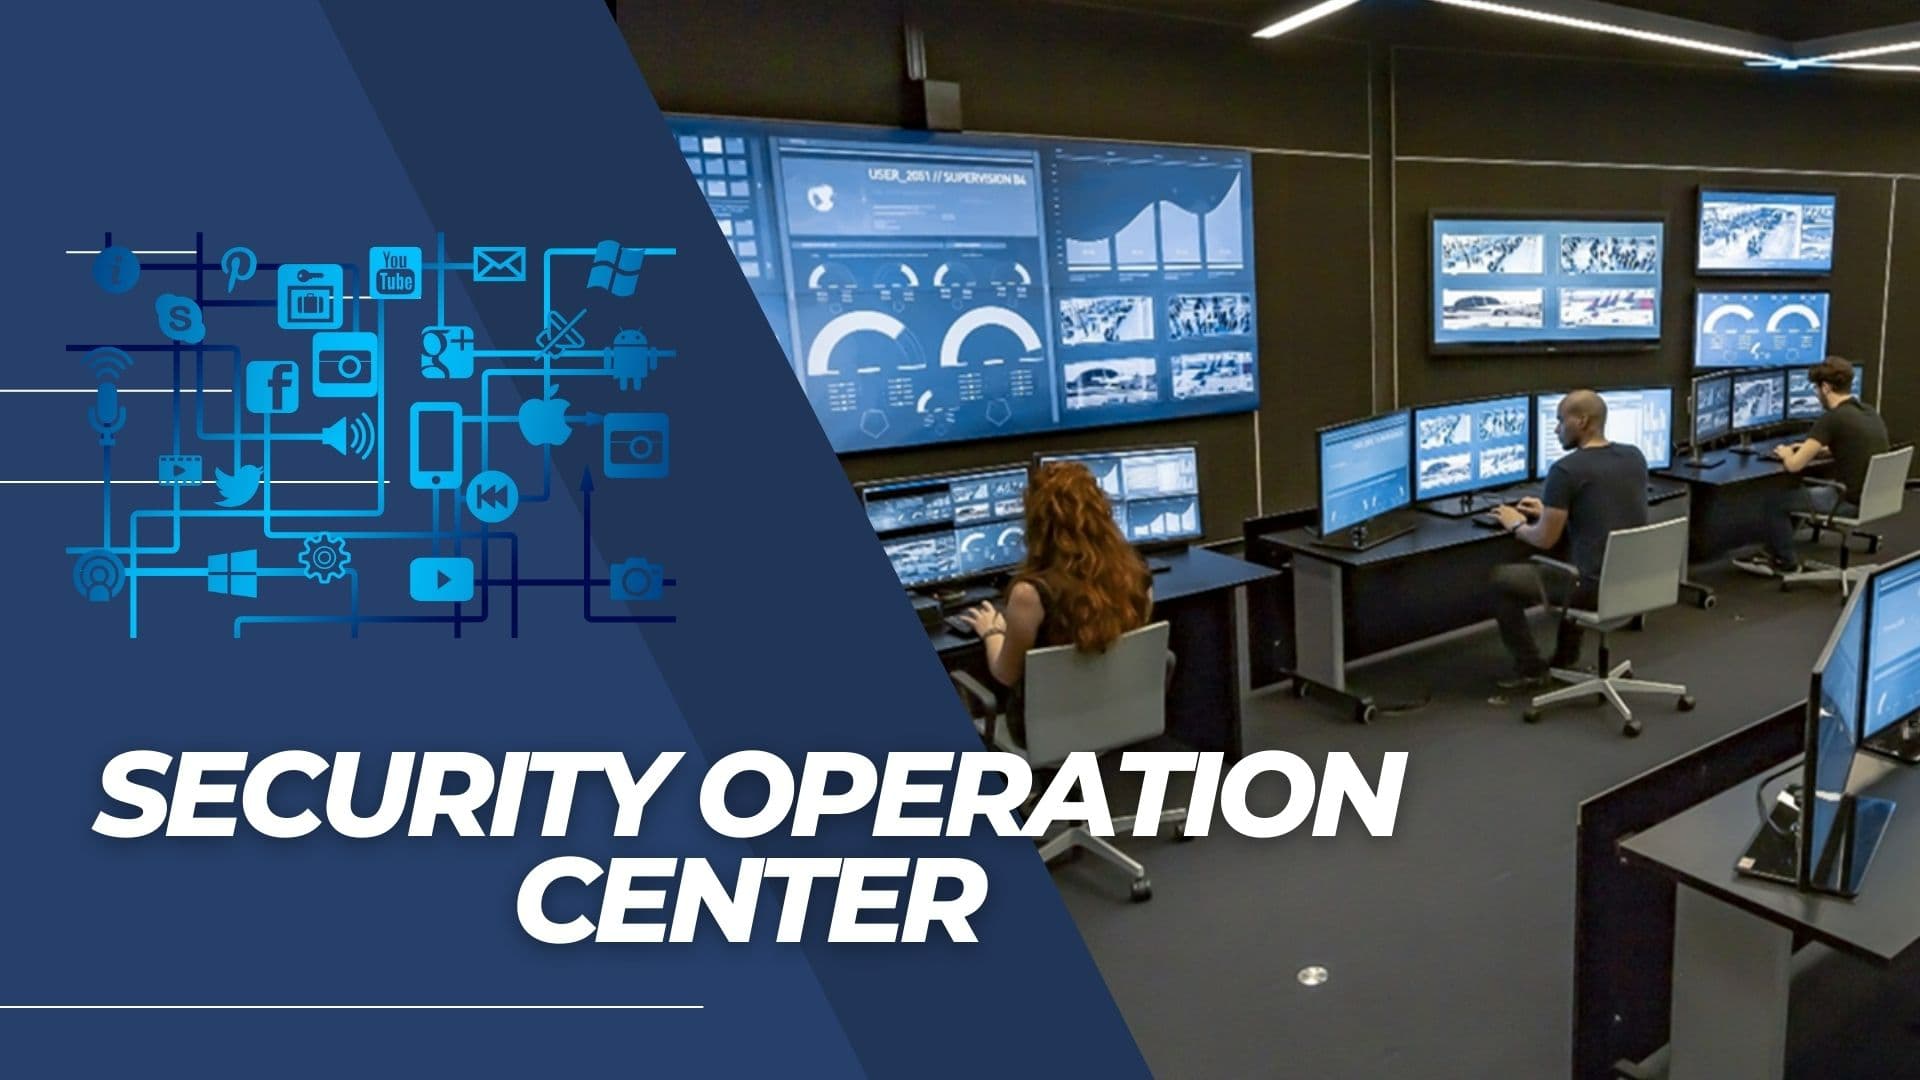 Security operation center